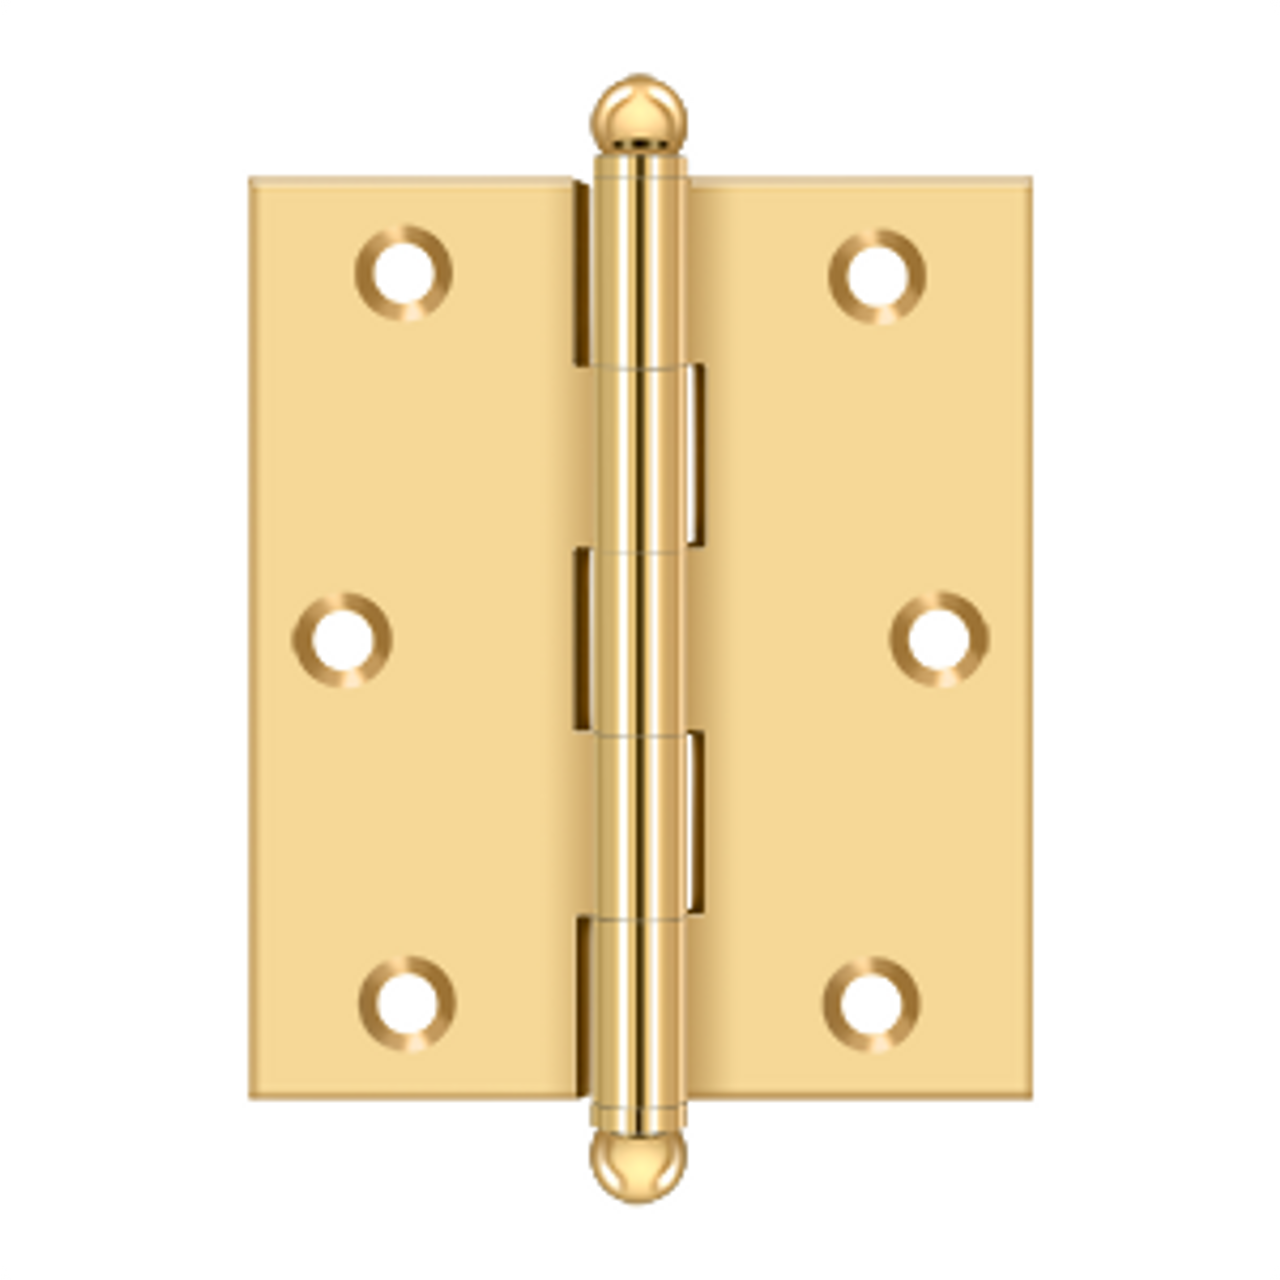 Deltana CH3025 SERIES SOLID BRASS 3" X 2-1/2" CABINET HINGES WITH BALL TIPS